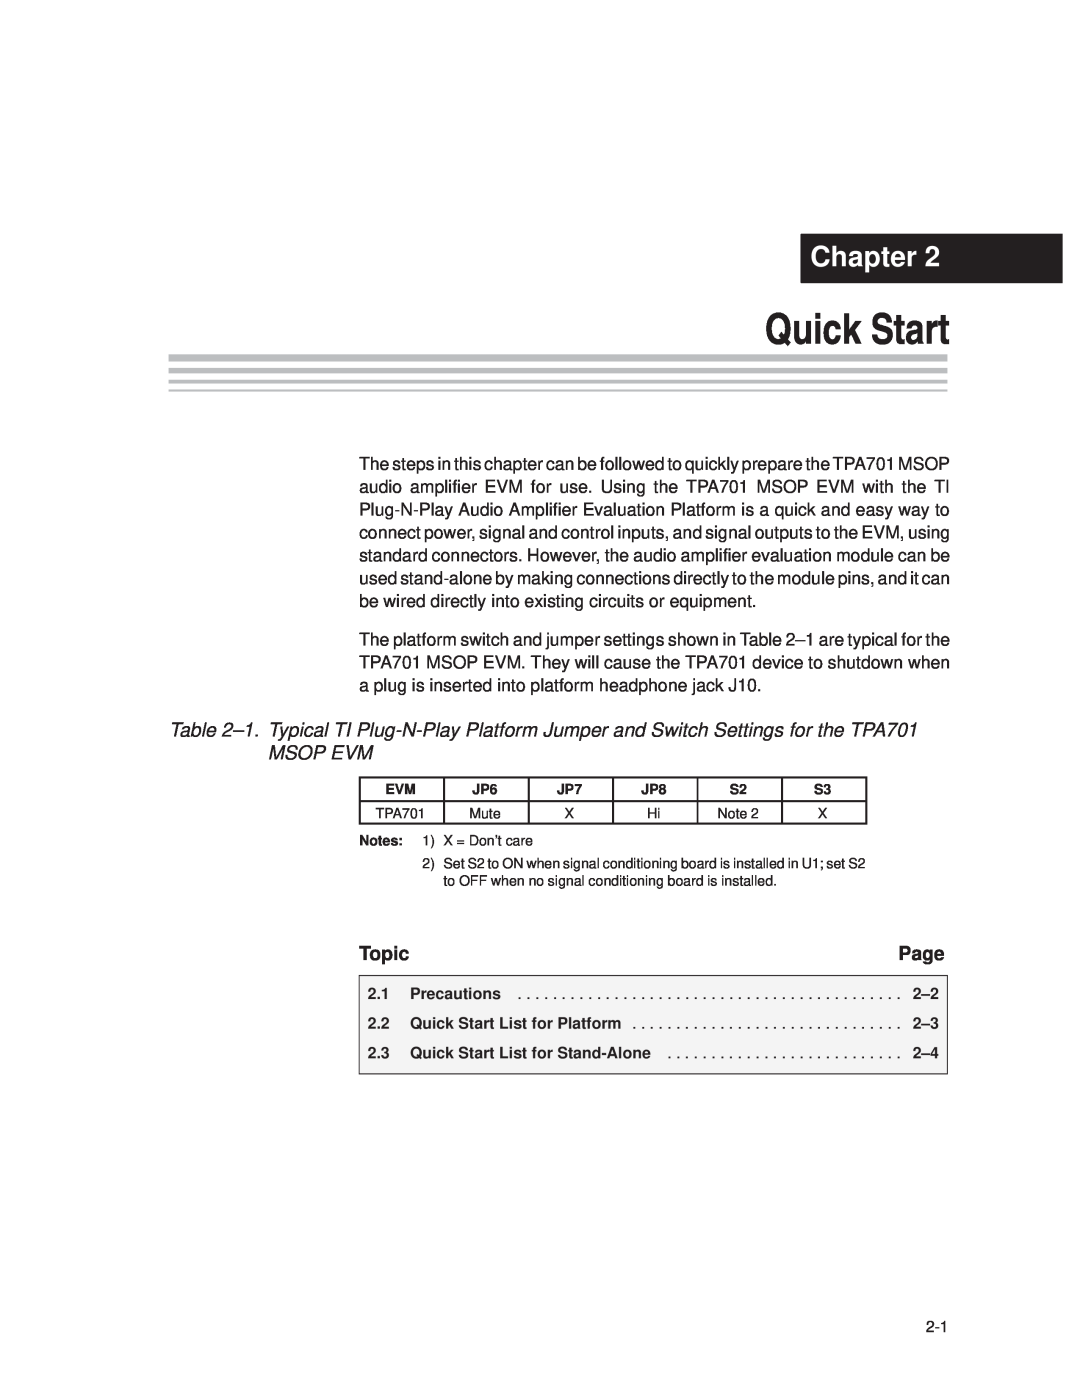 Texas Instruments TPA701 manual Quick Start, Msop Evm, Chapter, Page, Topic 